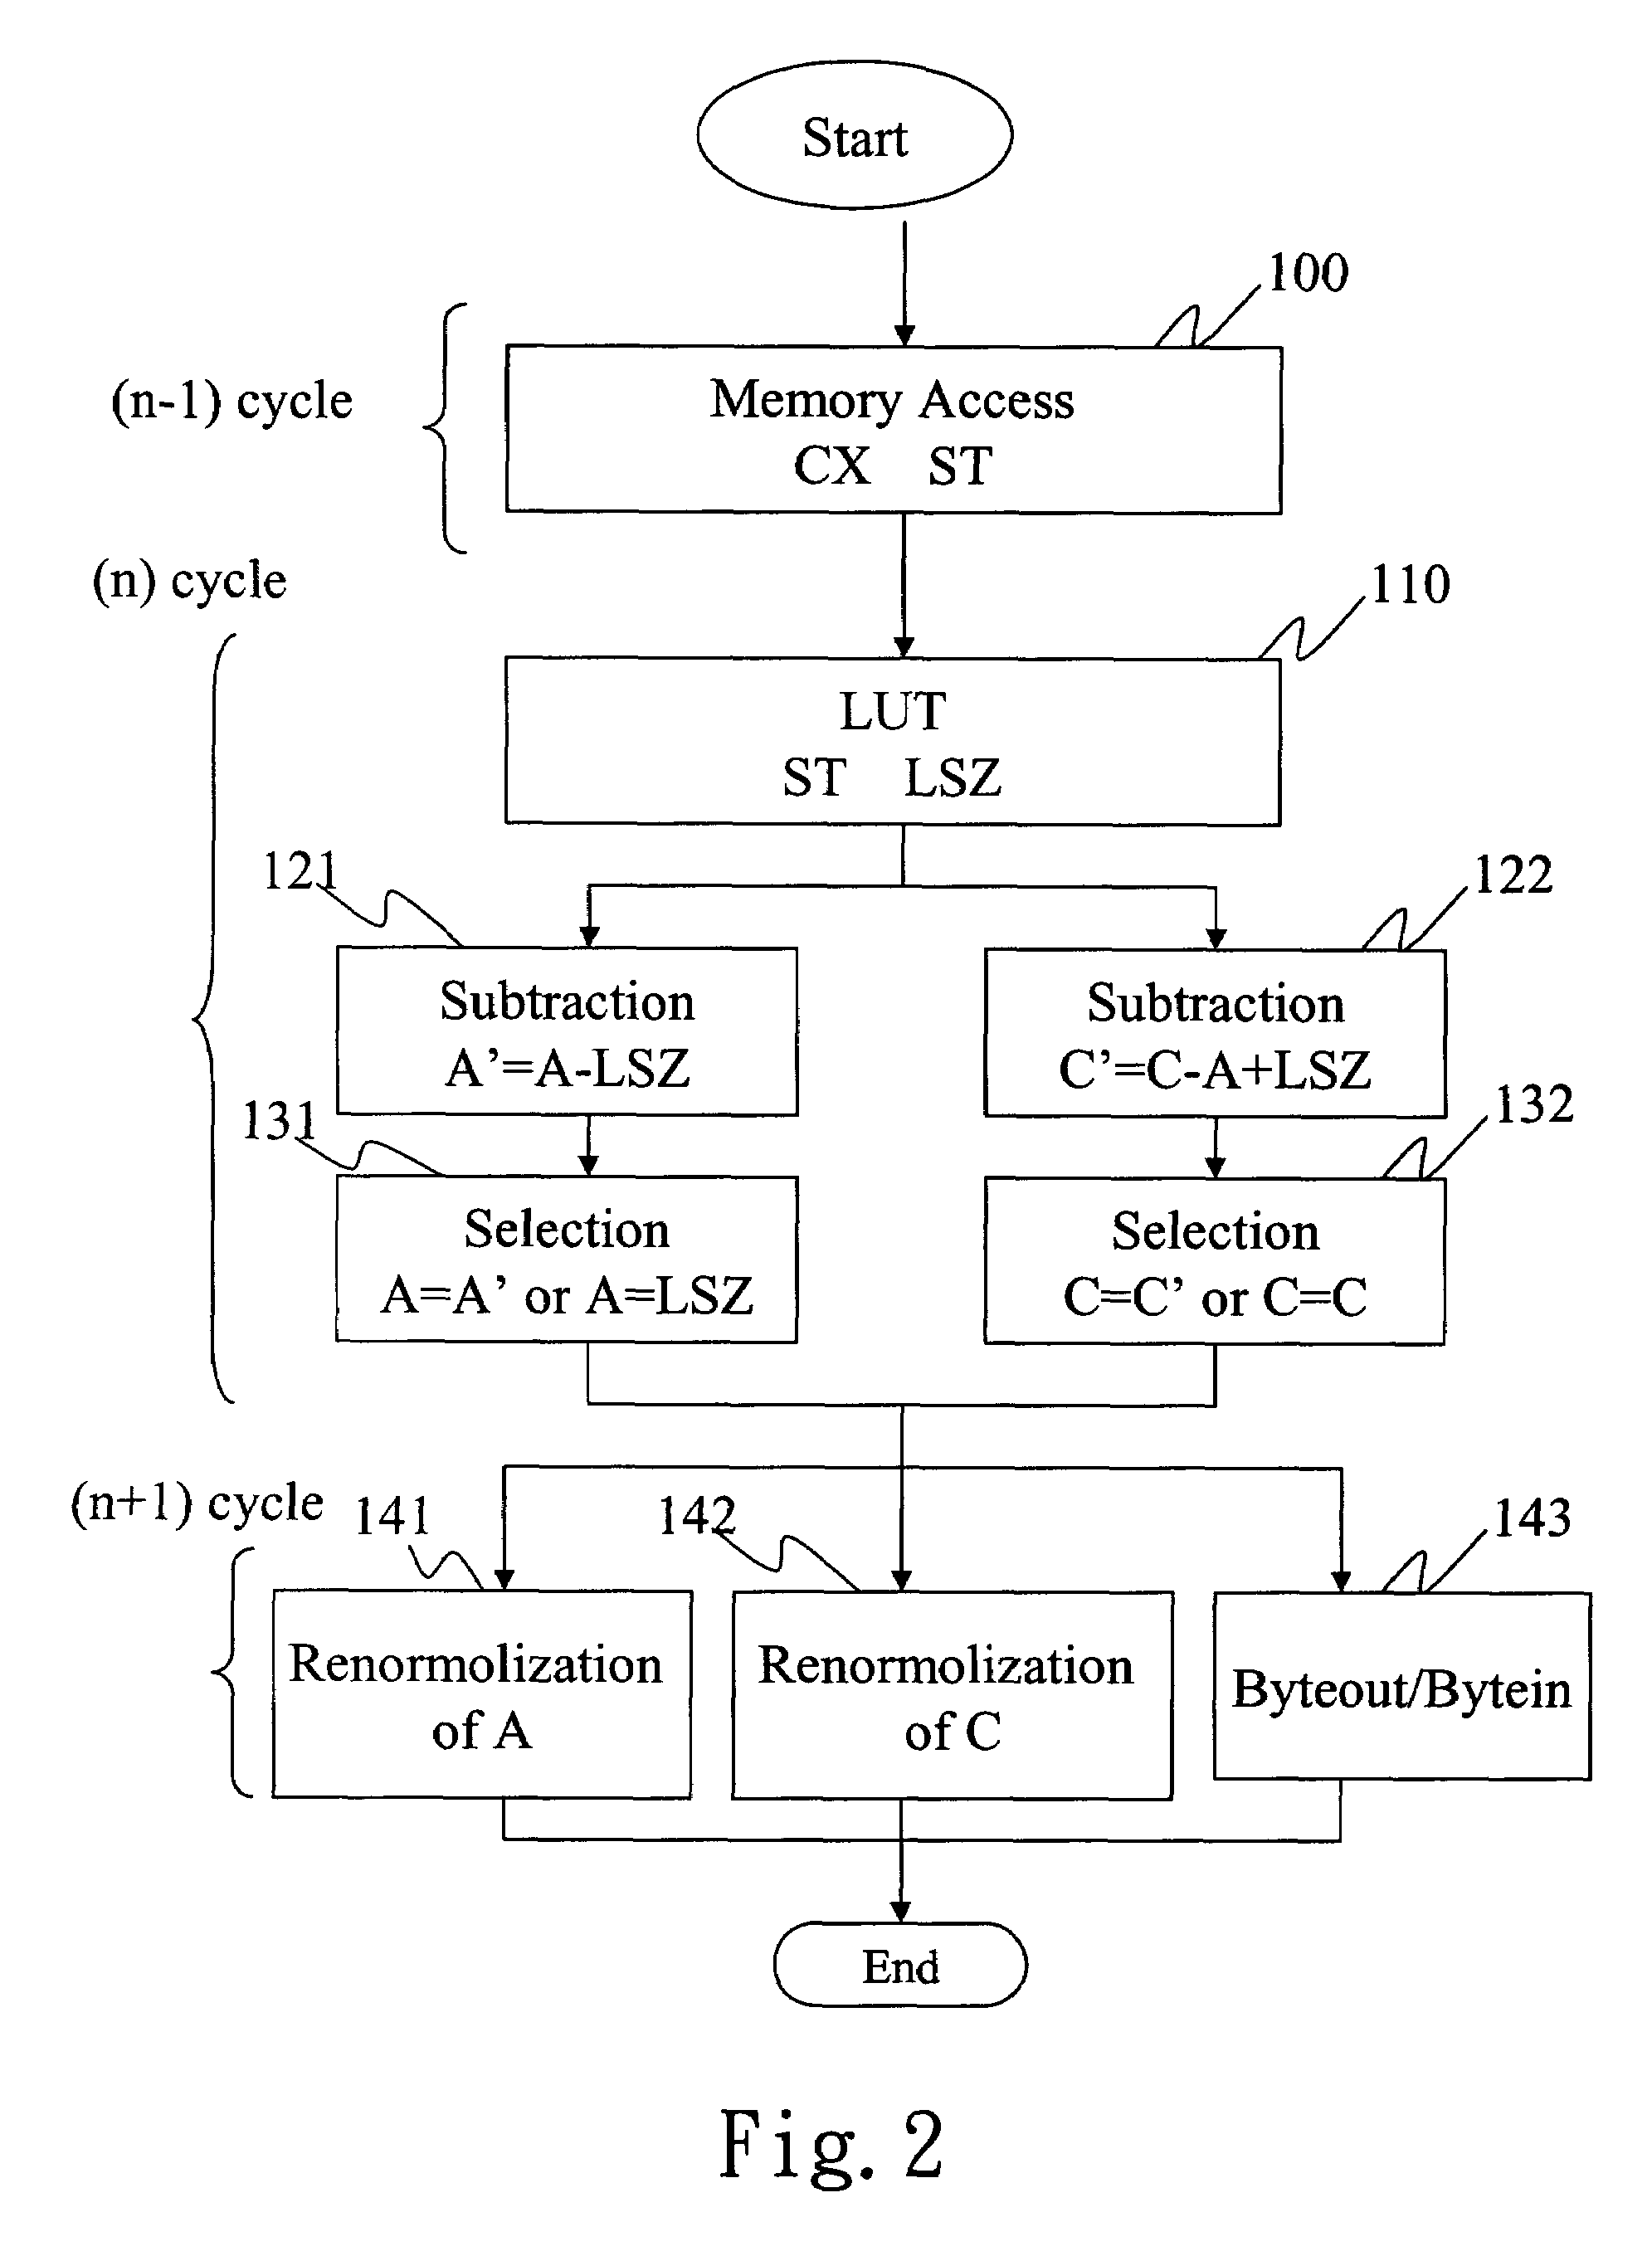 Method of compressing and decompressing images